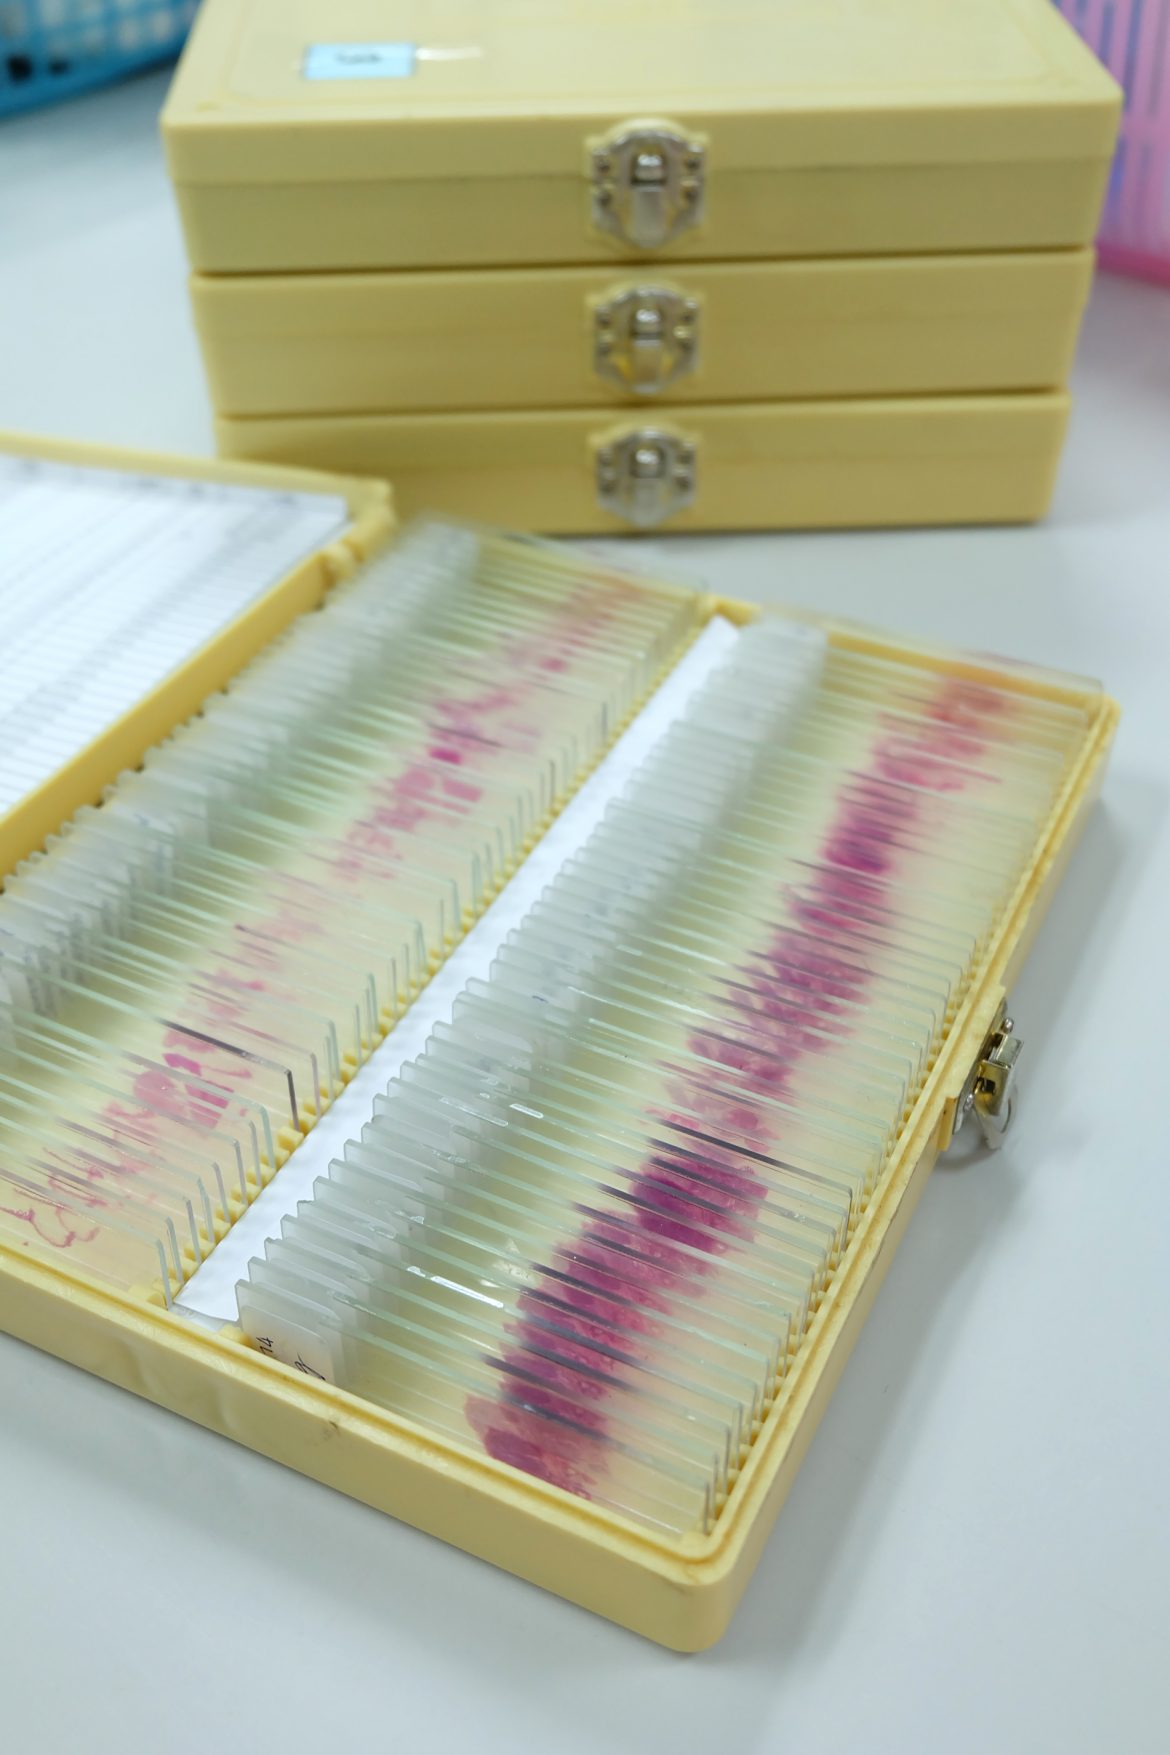 Histology slides in a box.